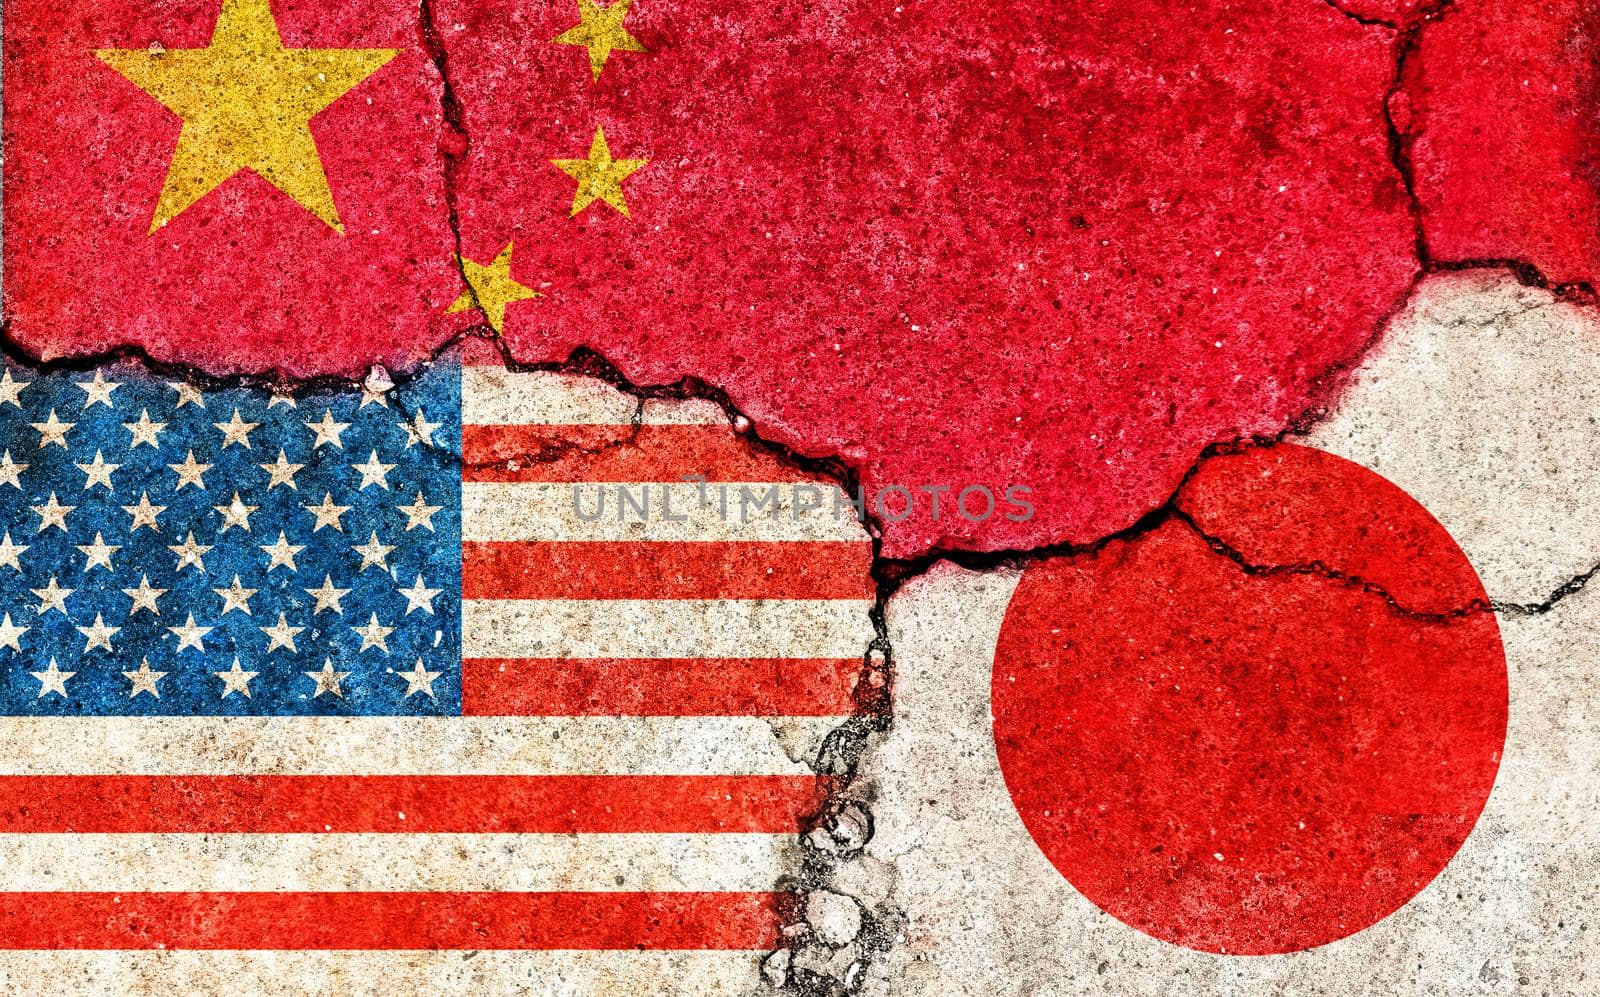 Grunge flags illustration of three countries with conflict and political problems (cracked concrete background) / China, USA and Japan by barks